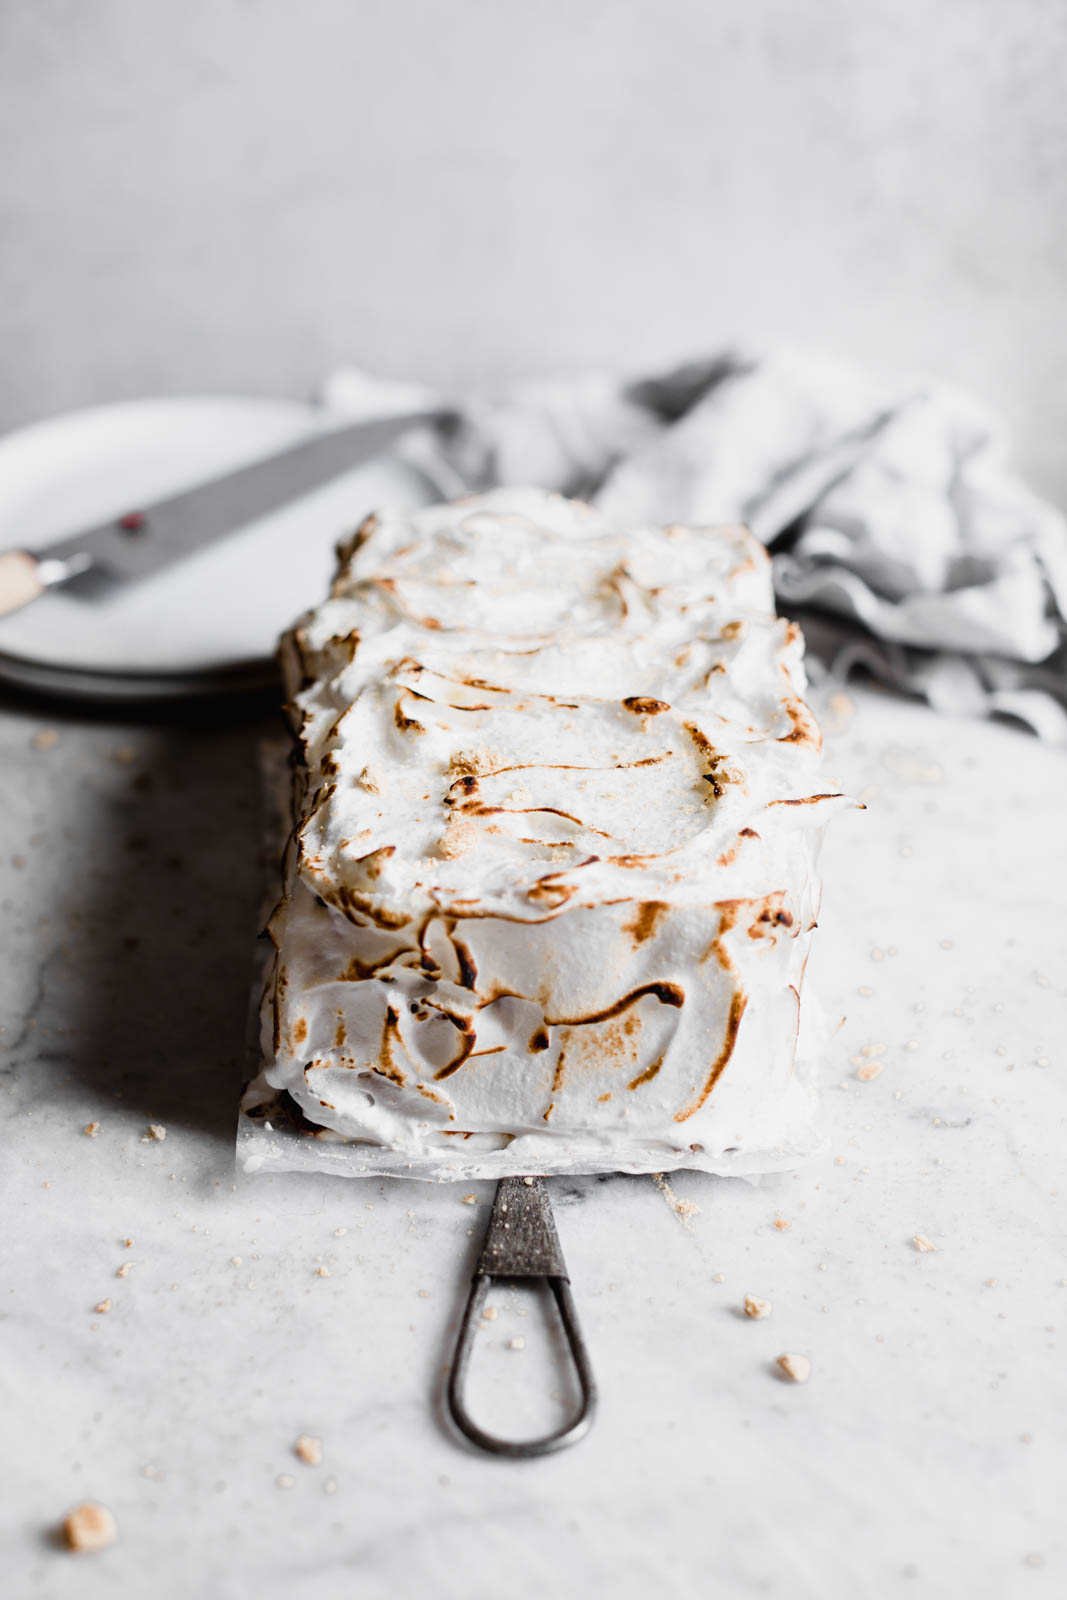 According to my boyfriend, this S'mores Ice Box Cake is "the best thing you've made all year." So yeah, you should probably make it, too.